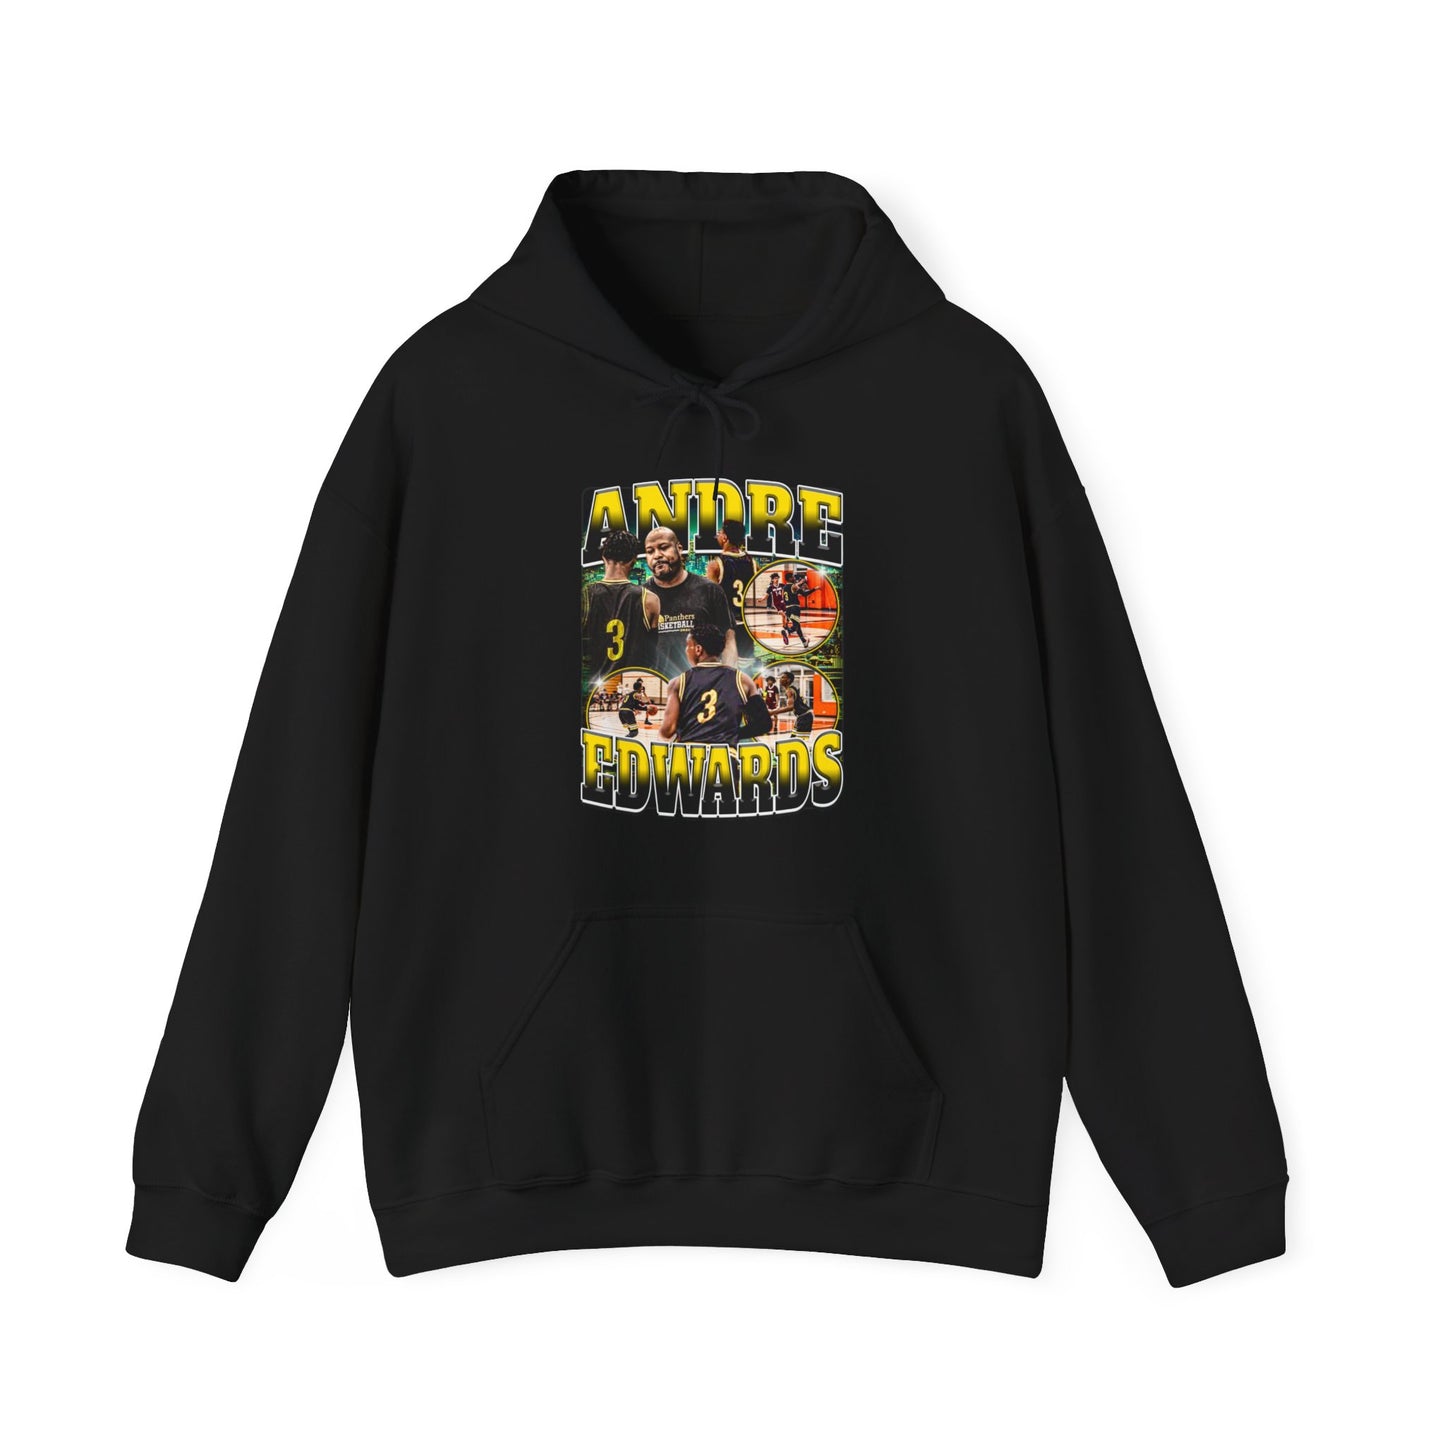 Andre Edwards Hoodie